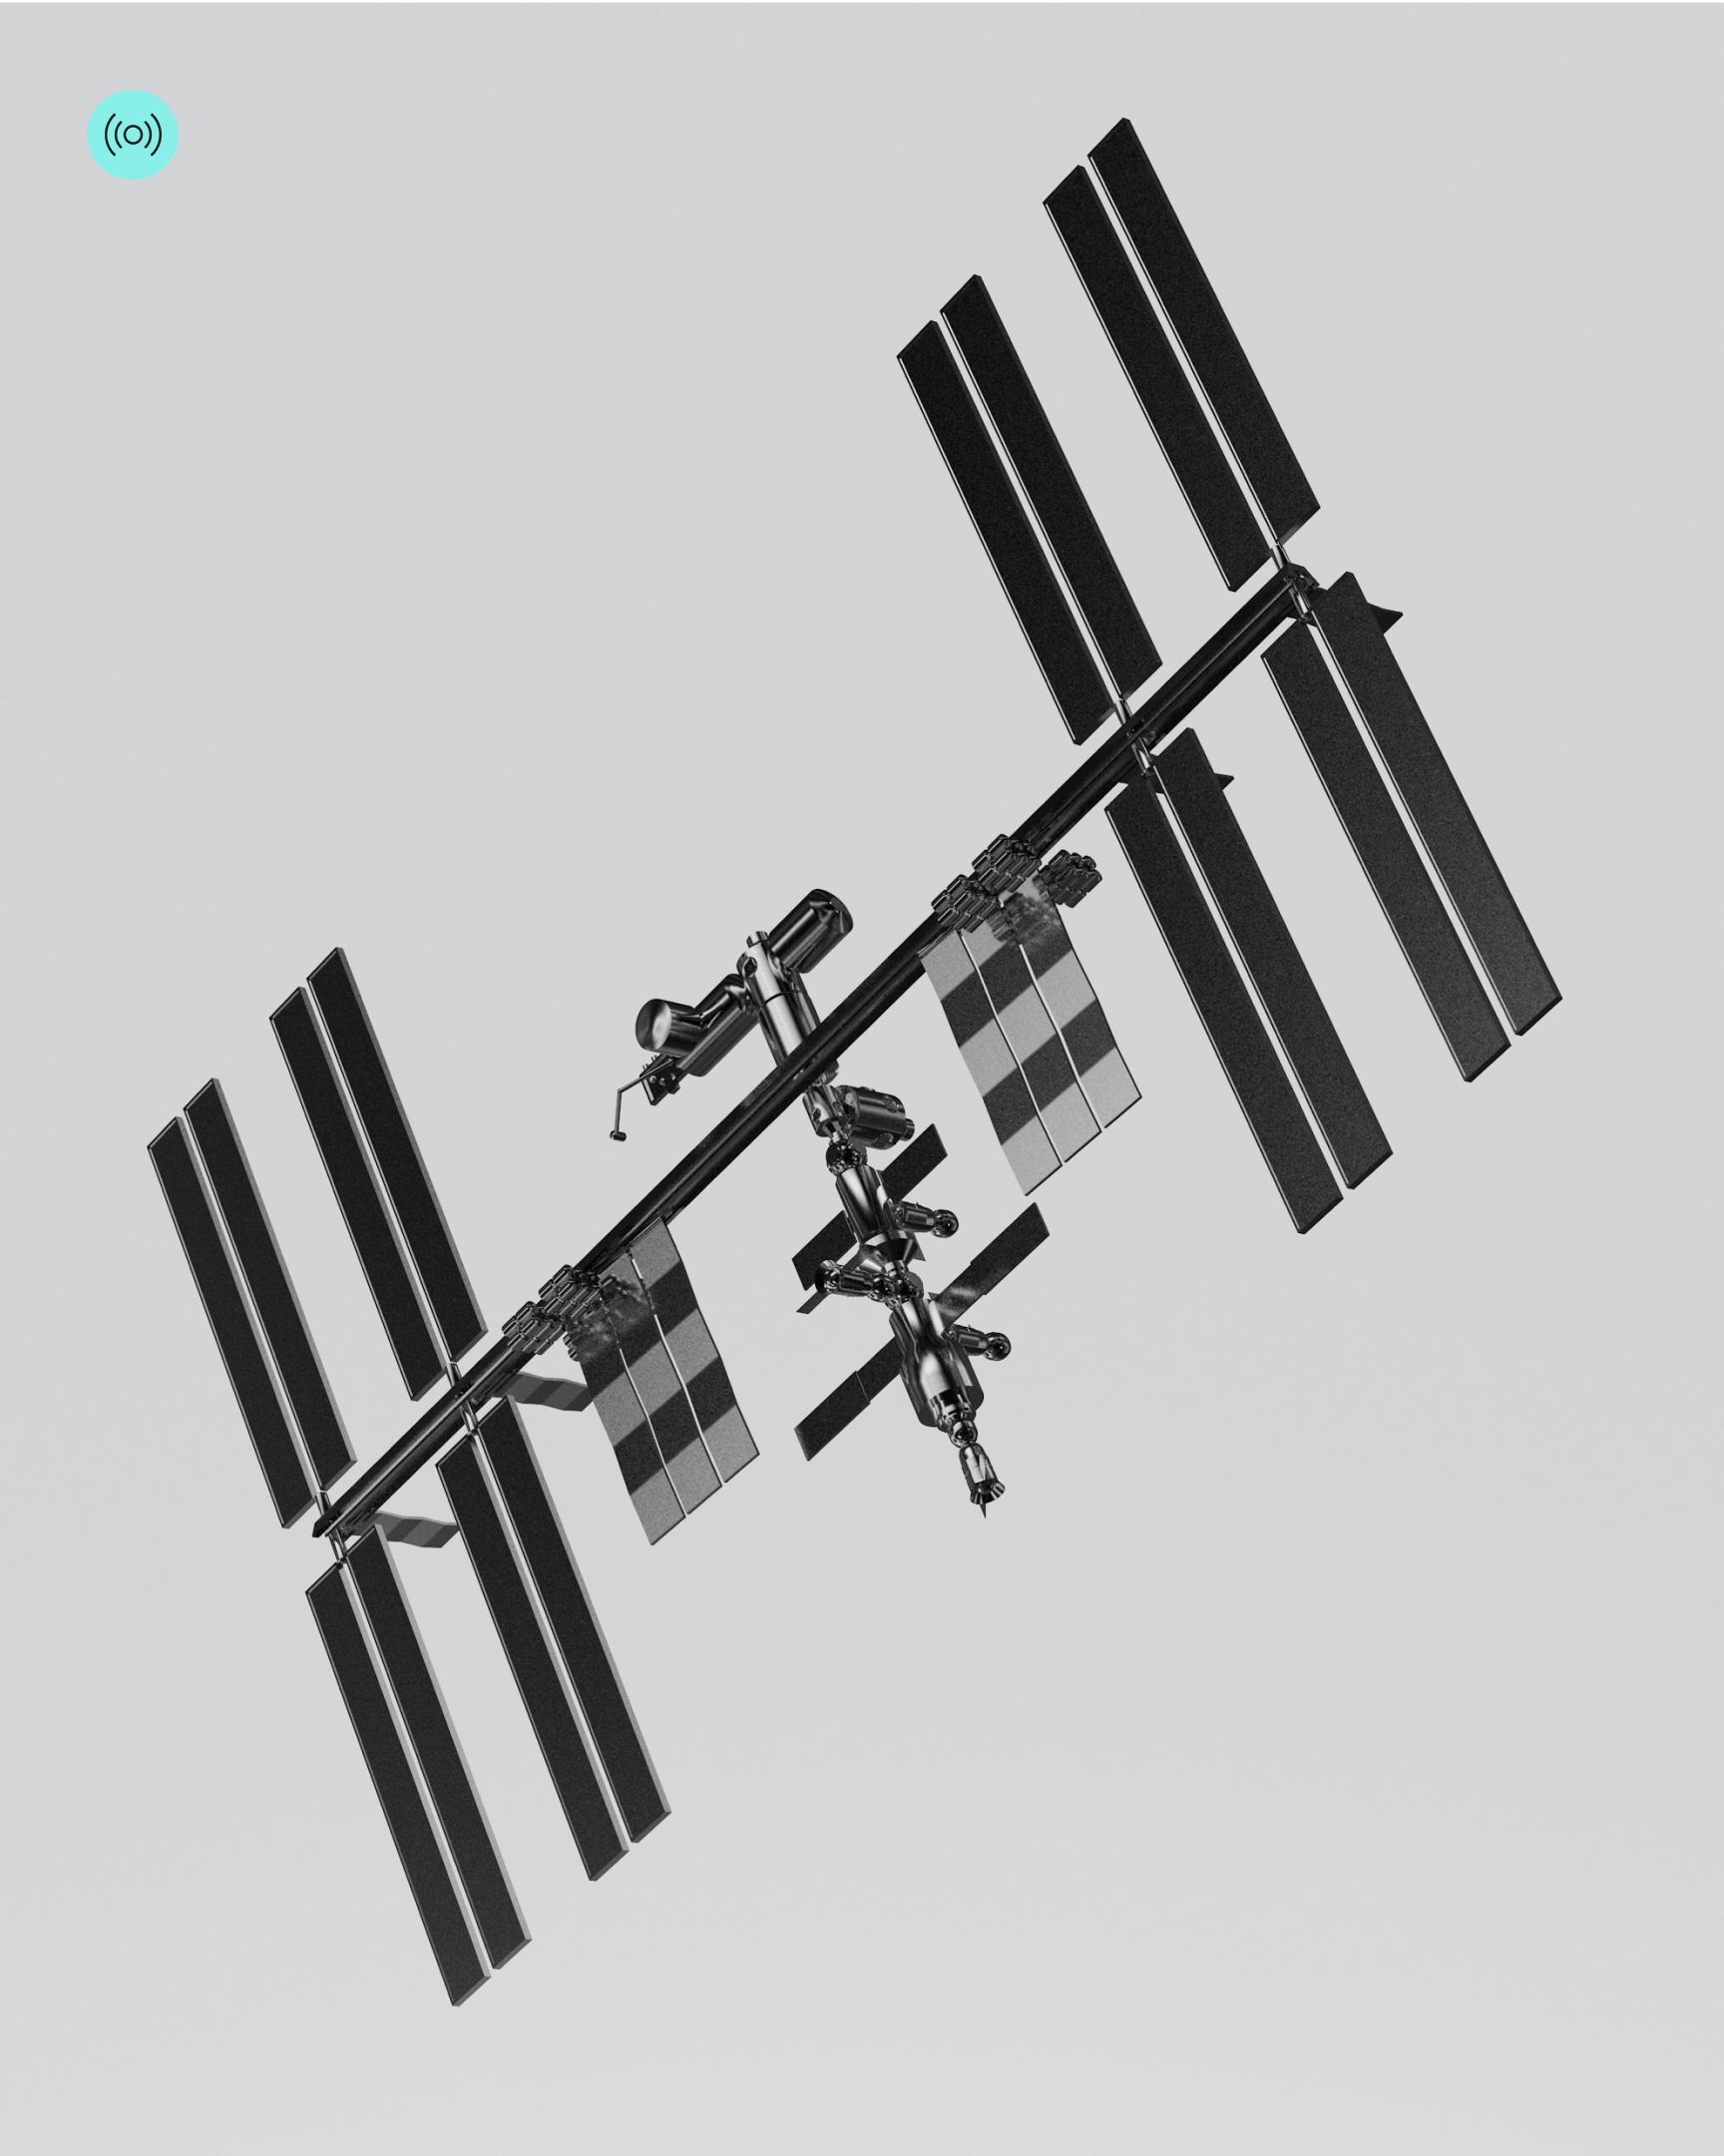 Photograph of a satellite 